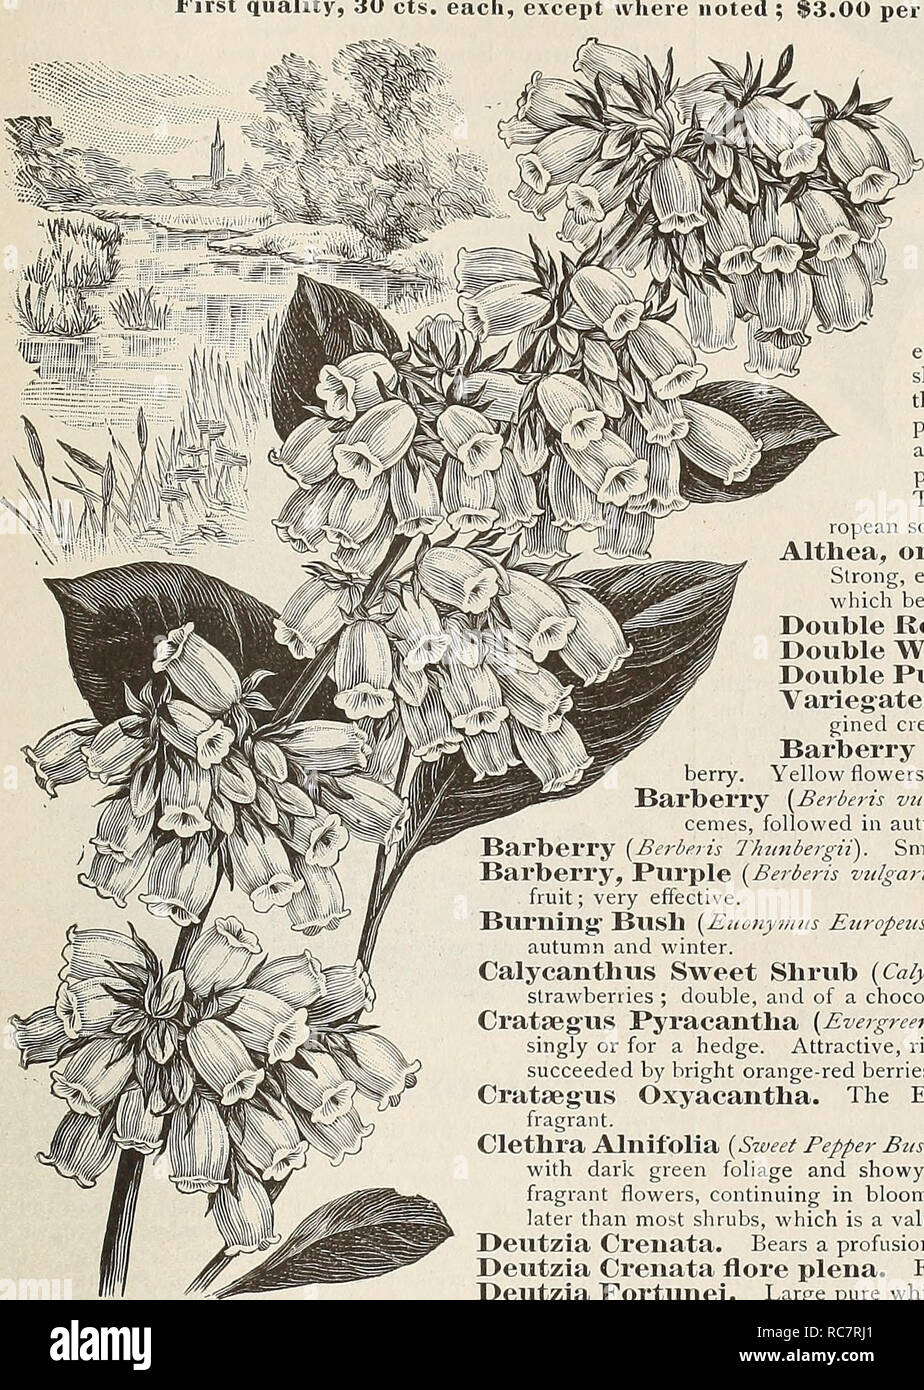 . Dreer's garden calendar for 1892 : a catalogue of choice vegetable, field and flower seeds new, rare and beautiful plants garden implements and fertilizers. Seeds Catalogs; Nursery stock Catalogs; Gardening Equipment and supplies Catalogs; Flowers Seeds Catalogs; Vegetables Seeds Catalogs. HARDY FLOWERING SHRUBS. 139 Hflf*DY SHRUBS. First quality, 30 cts. each, except wlie. 00 per doz.; $20.00 per lOu. Andromeda Mariana. OogWOOd, Red Twigged (Cornus sanguined). A strong growing bush, with crimson colored branches, mak- ing it an attractive object in winter. Exochorda grandiflora. Finely shap Stock Photo